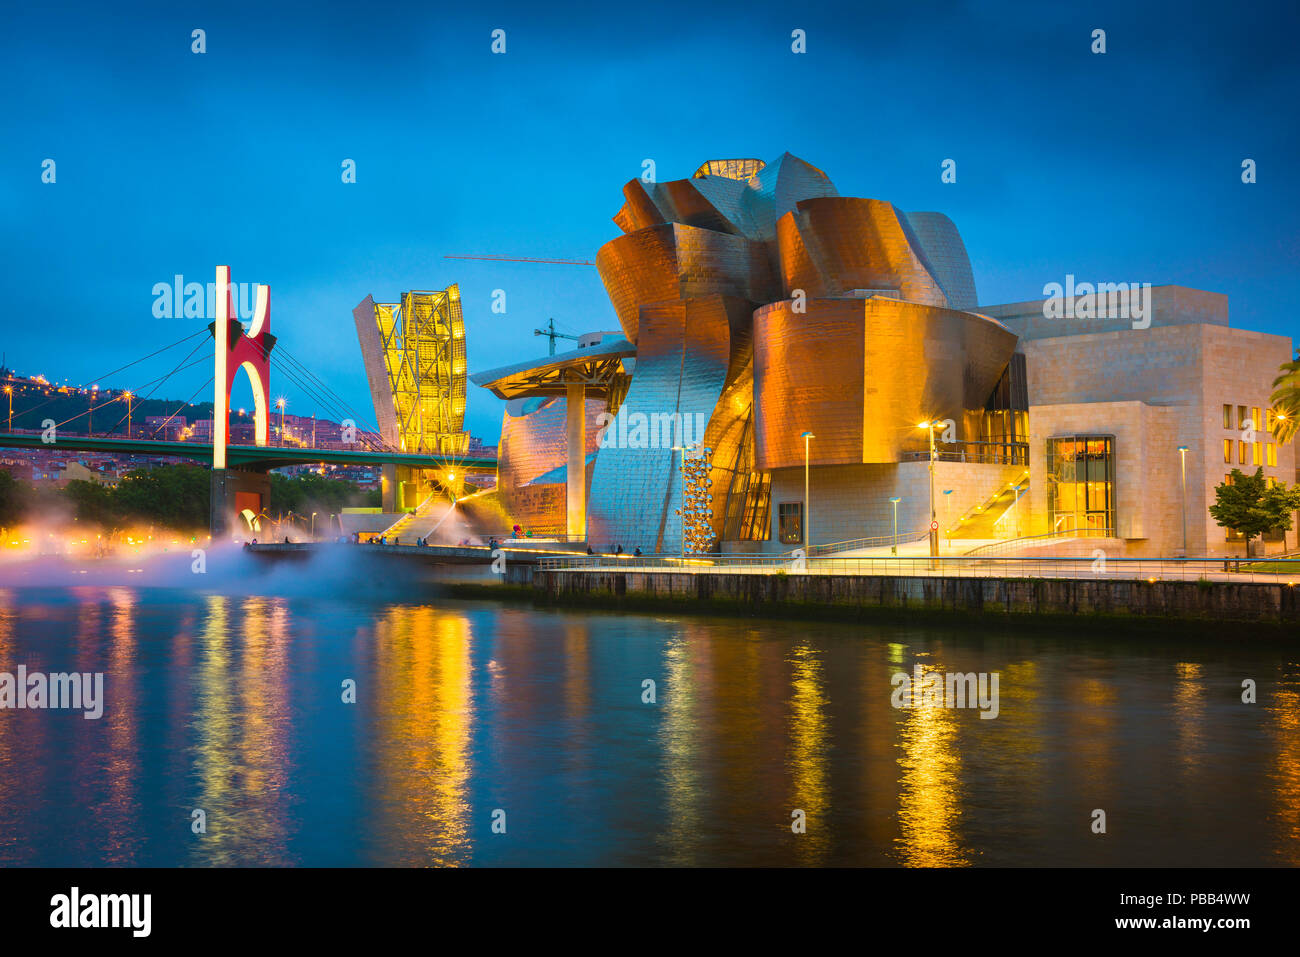 Bilbao cityscape, view at night across the river towards the illuminated Guggenheim Museum and the Puente de la Salve in the center of Bilbao, Spain. Stock Photo